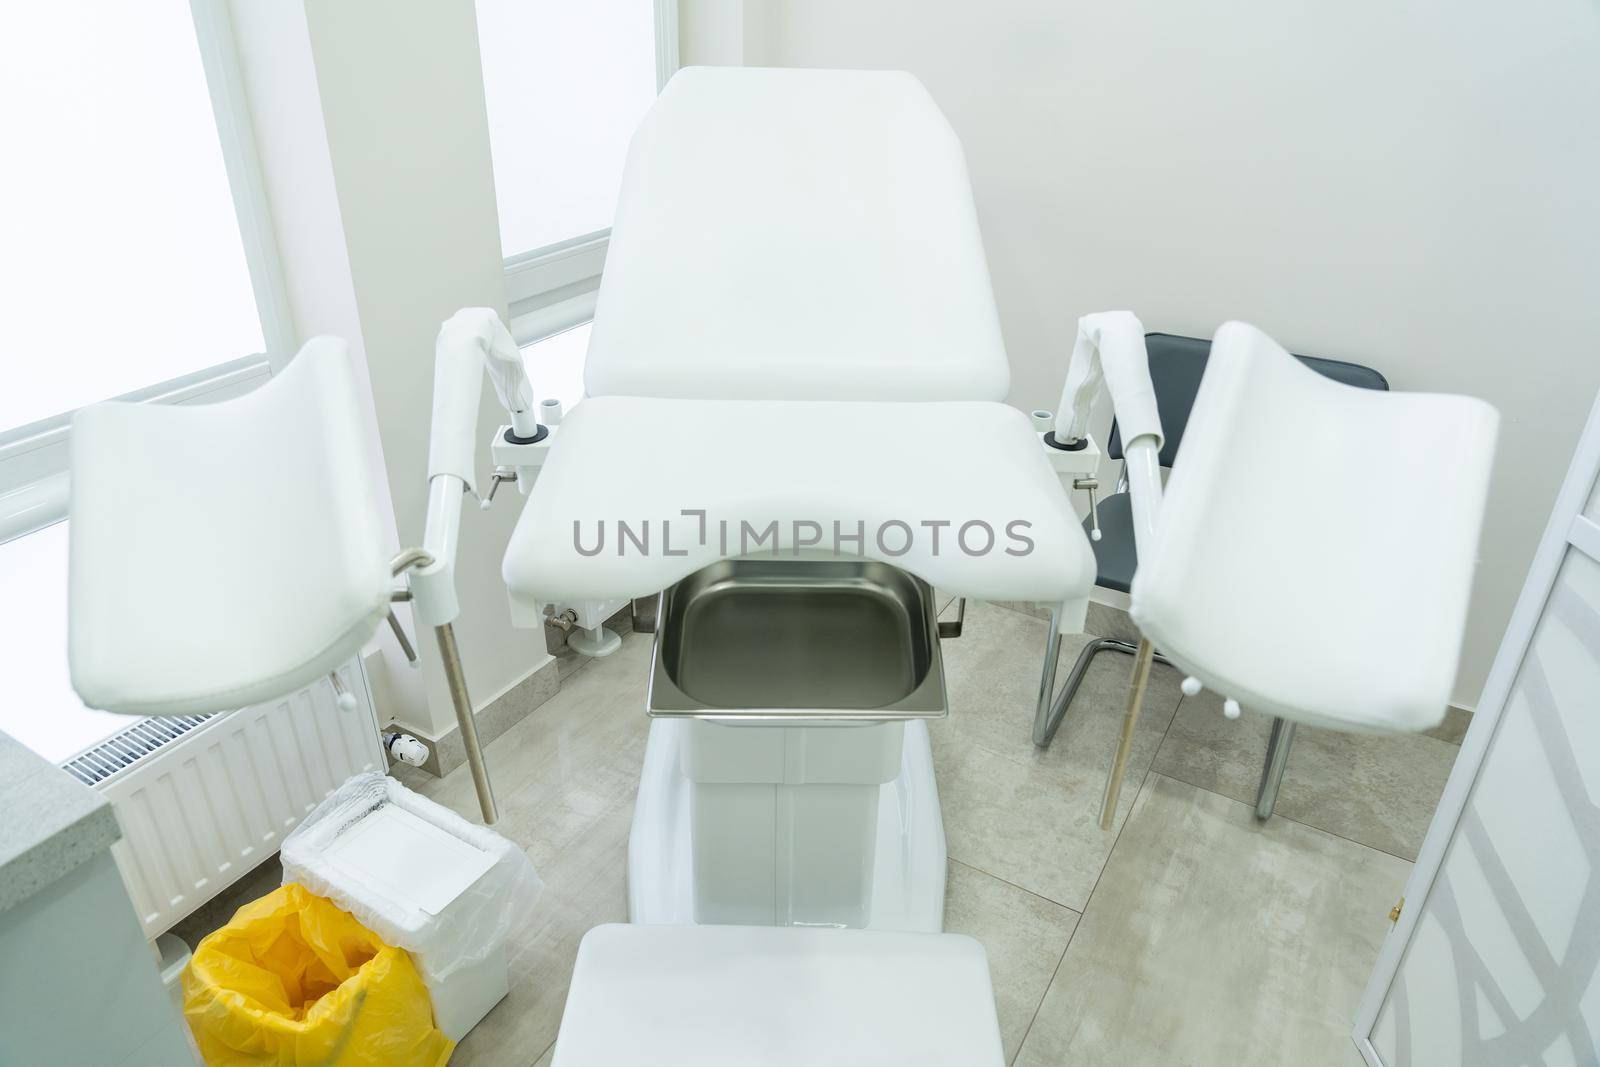 Gynecological chair in modern medical center by Mariakray